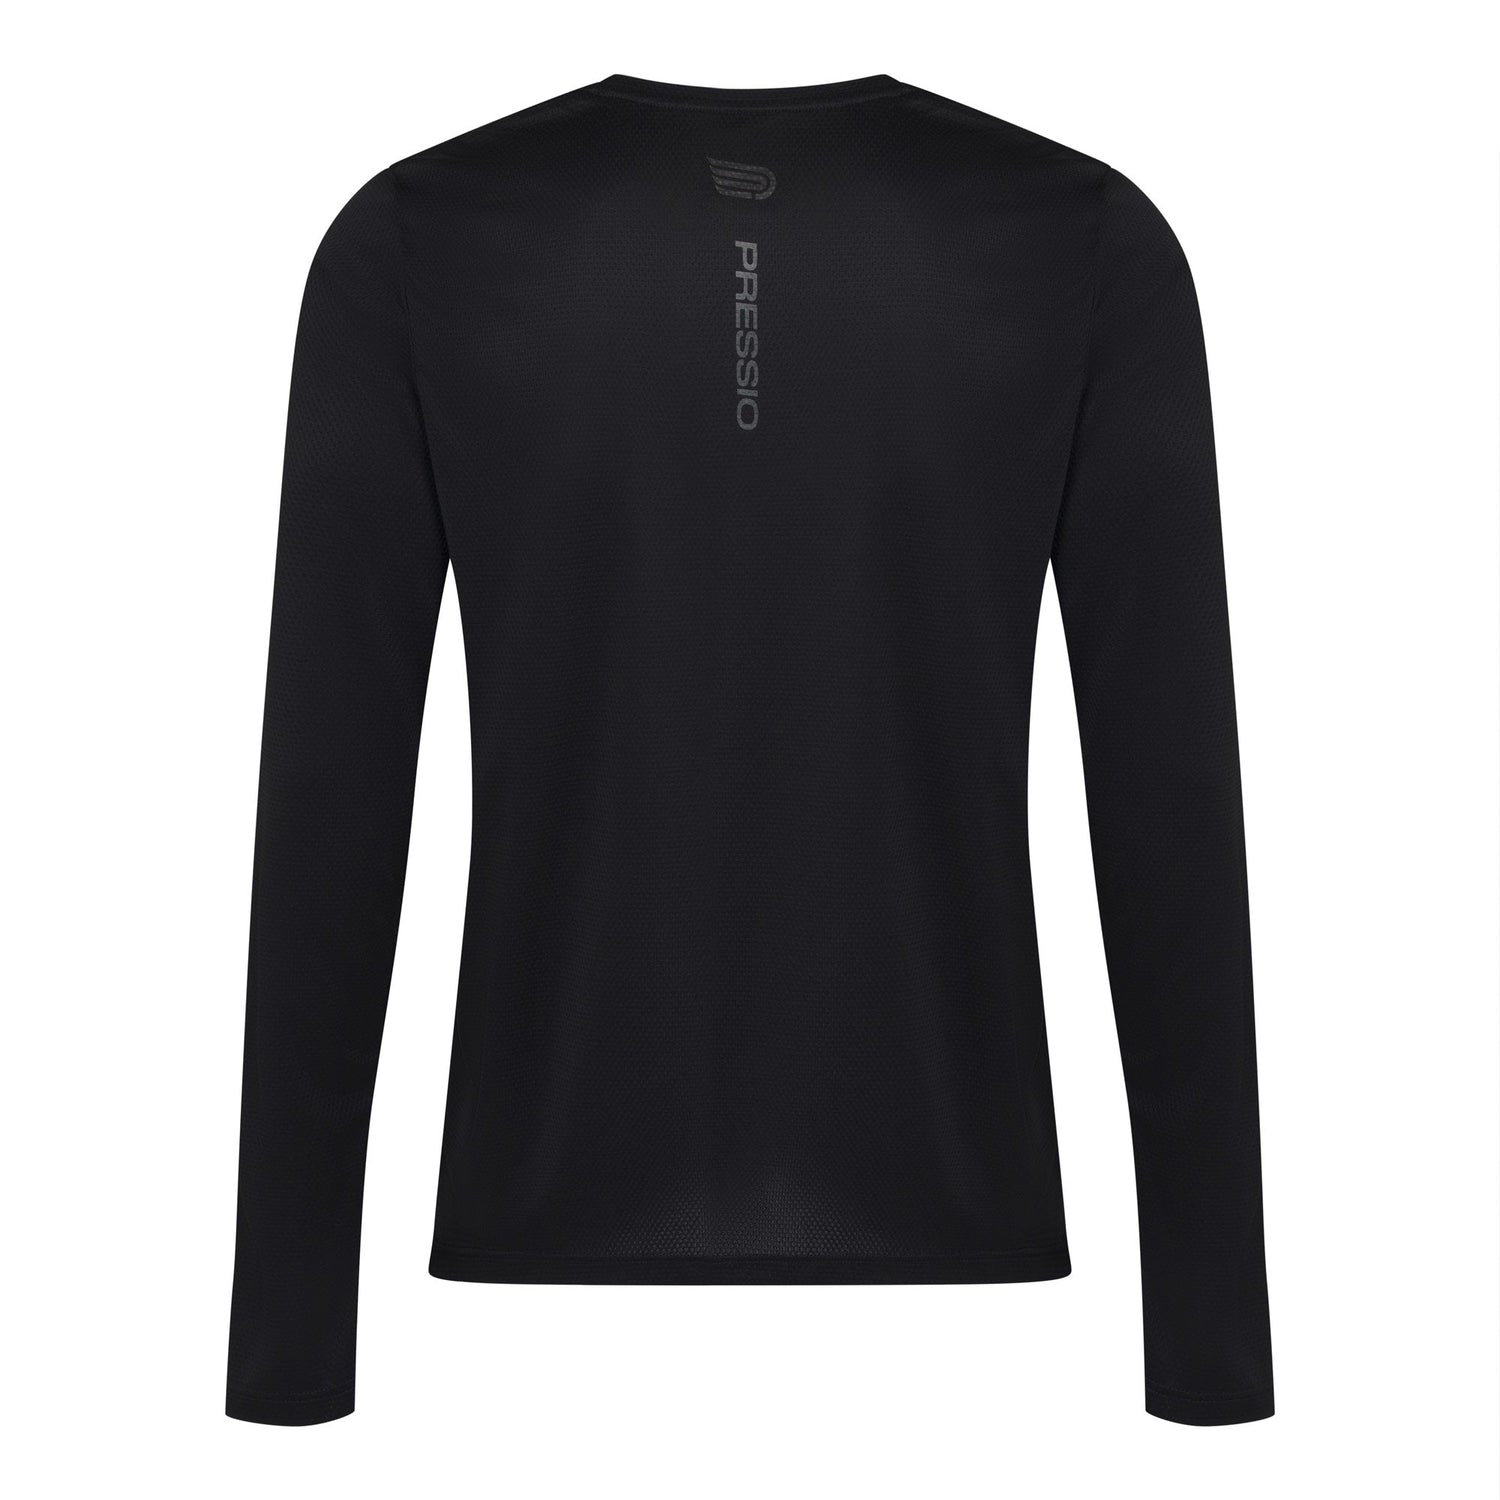 Pressio M's Hāpai Long Sleeve Top - Recycled Polyester Black Matte Shirt